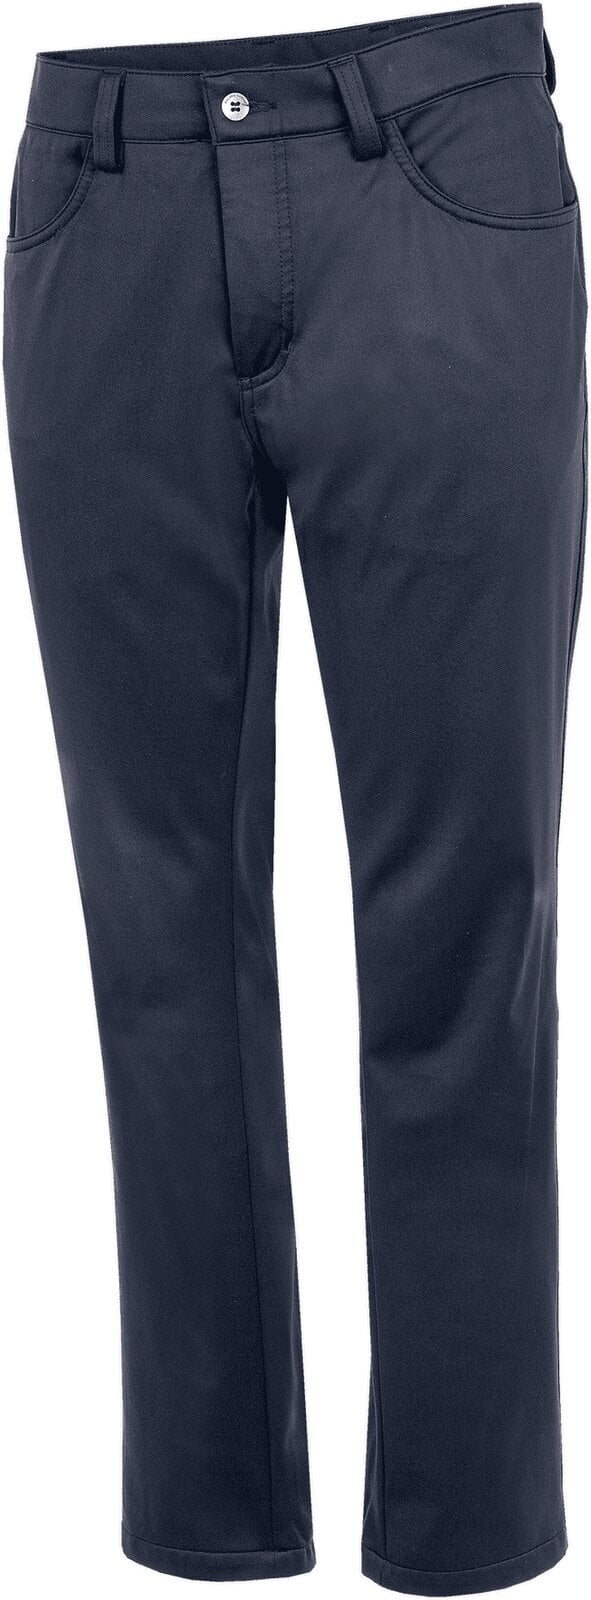 Kalhoty Galvin Green Lane MensWindproof And Water Repellent Pants Navy 32/32